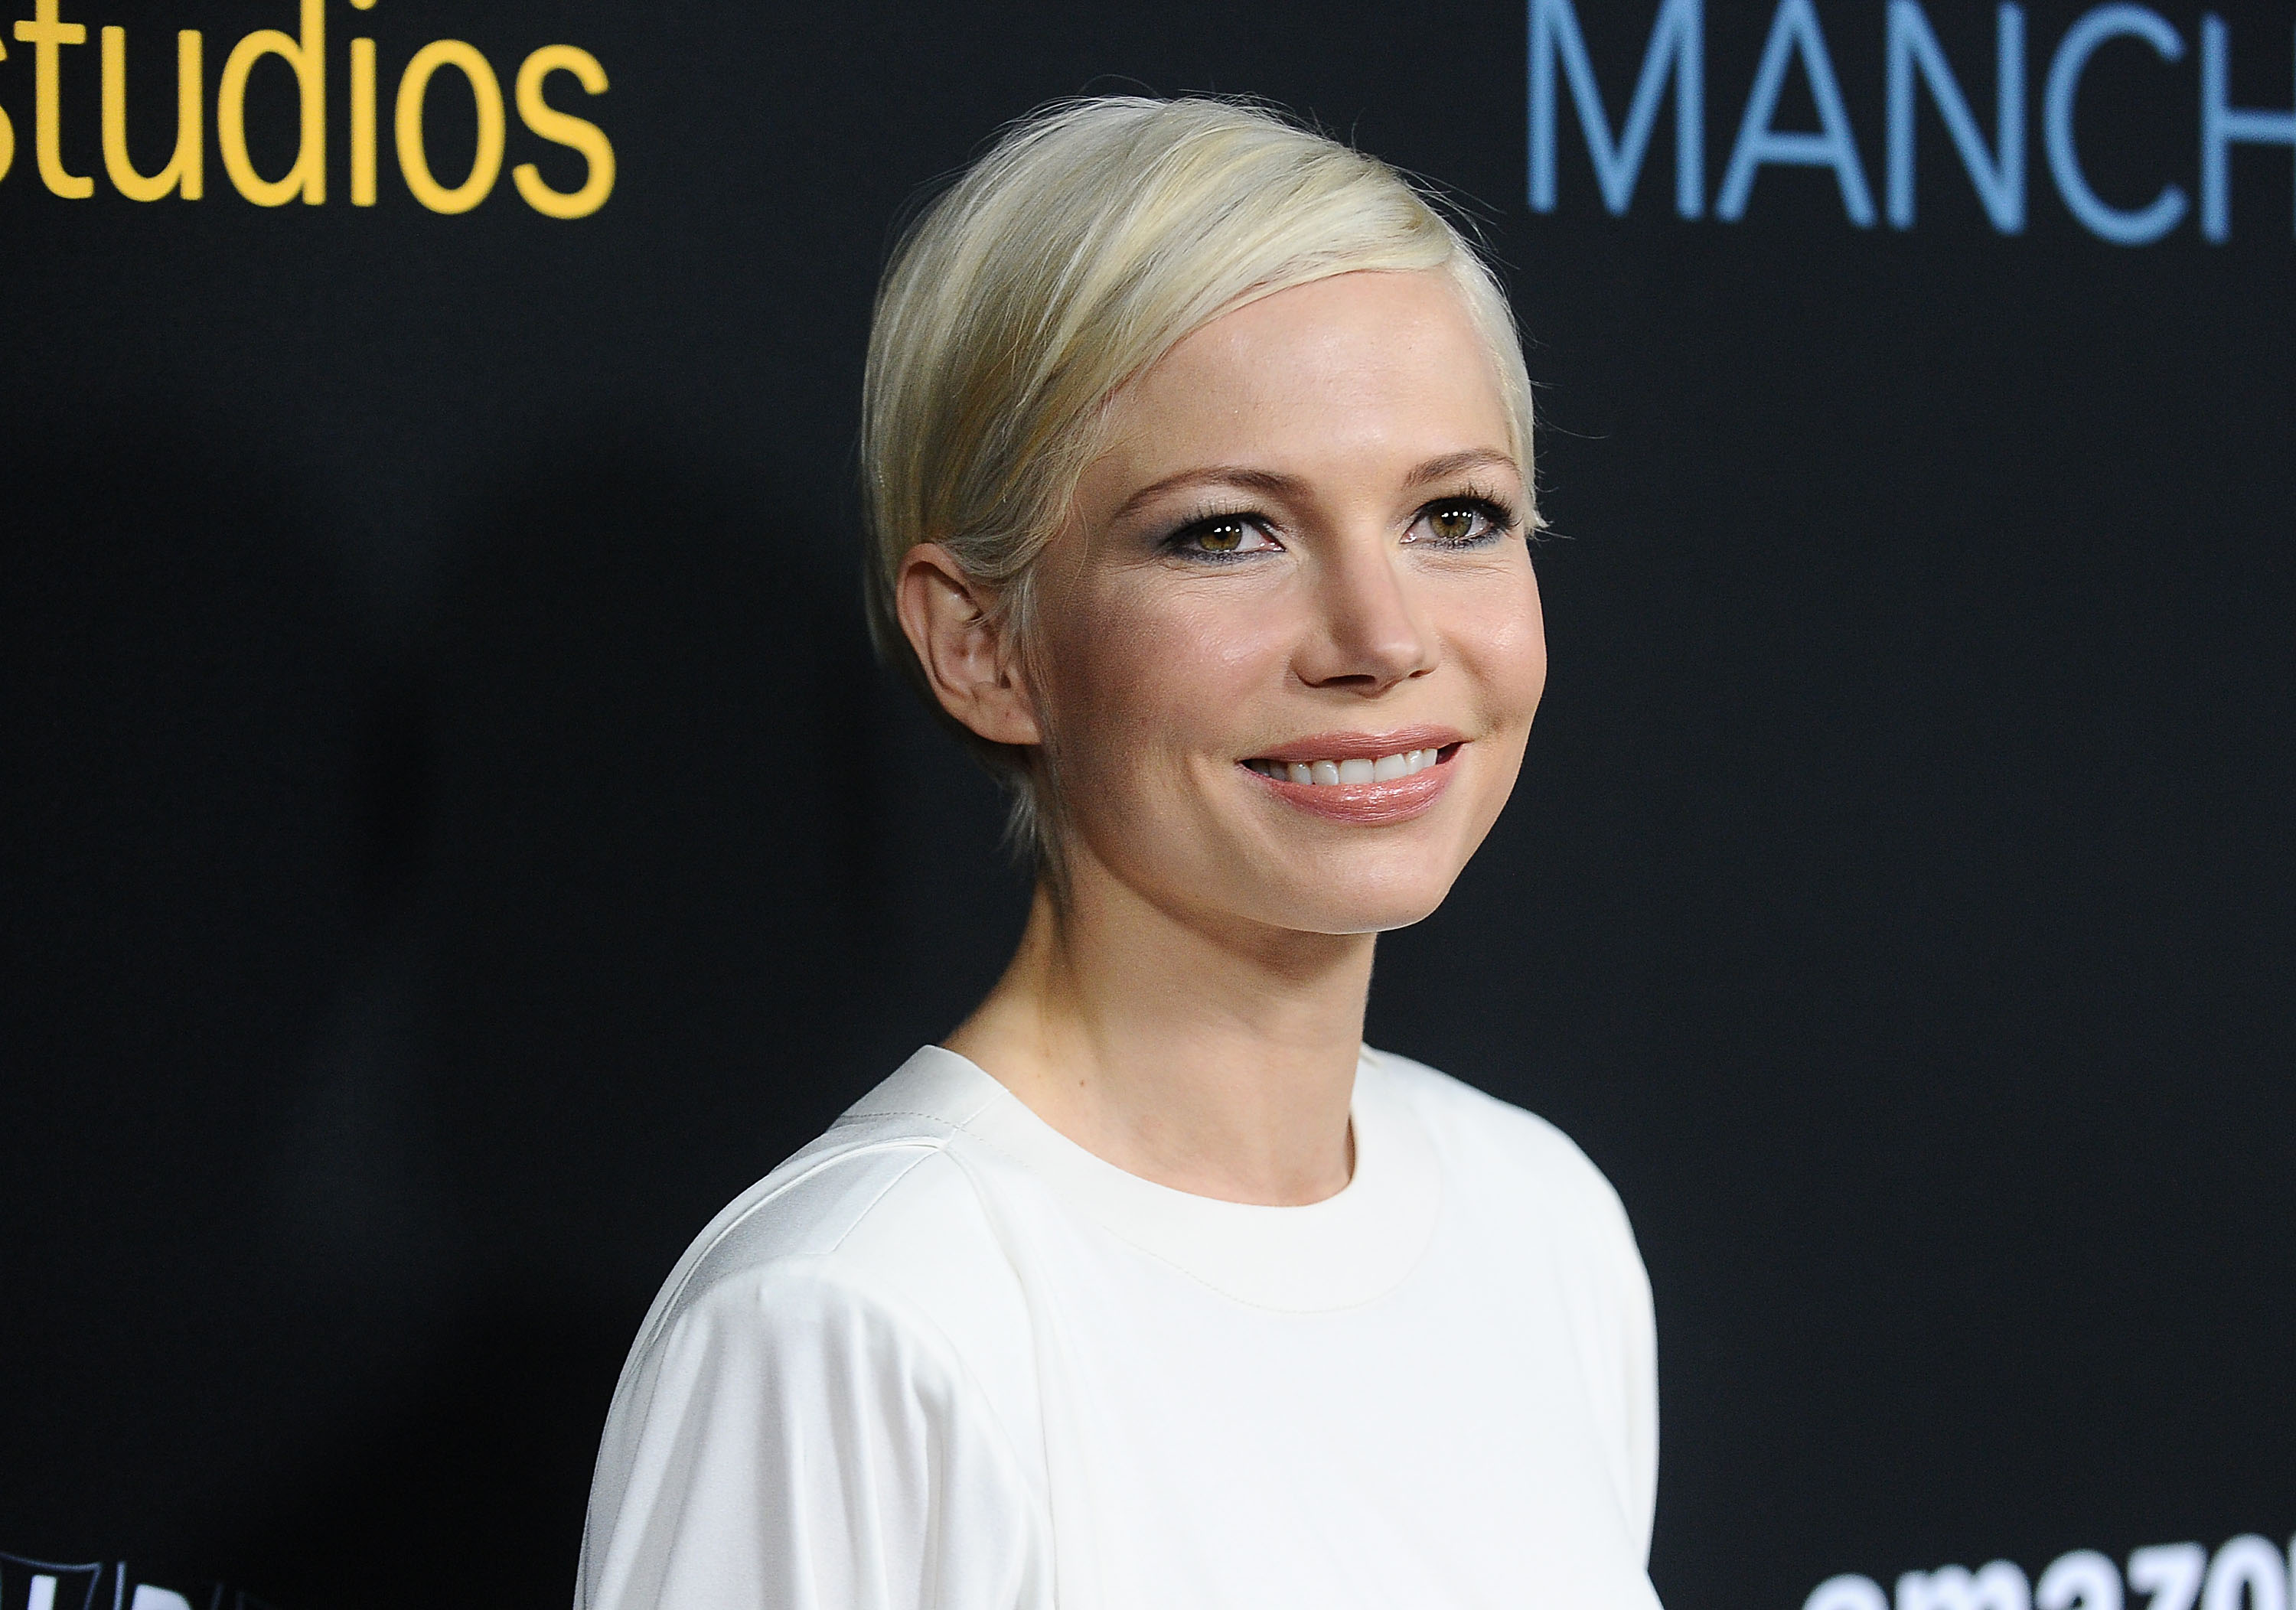 Actress Michelle Williams attends the premiere of 